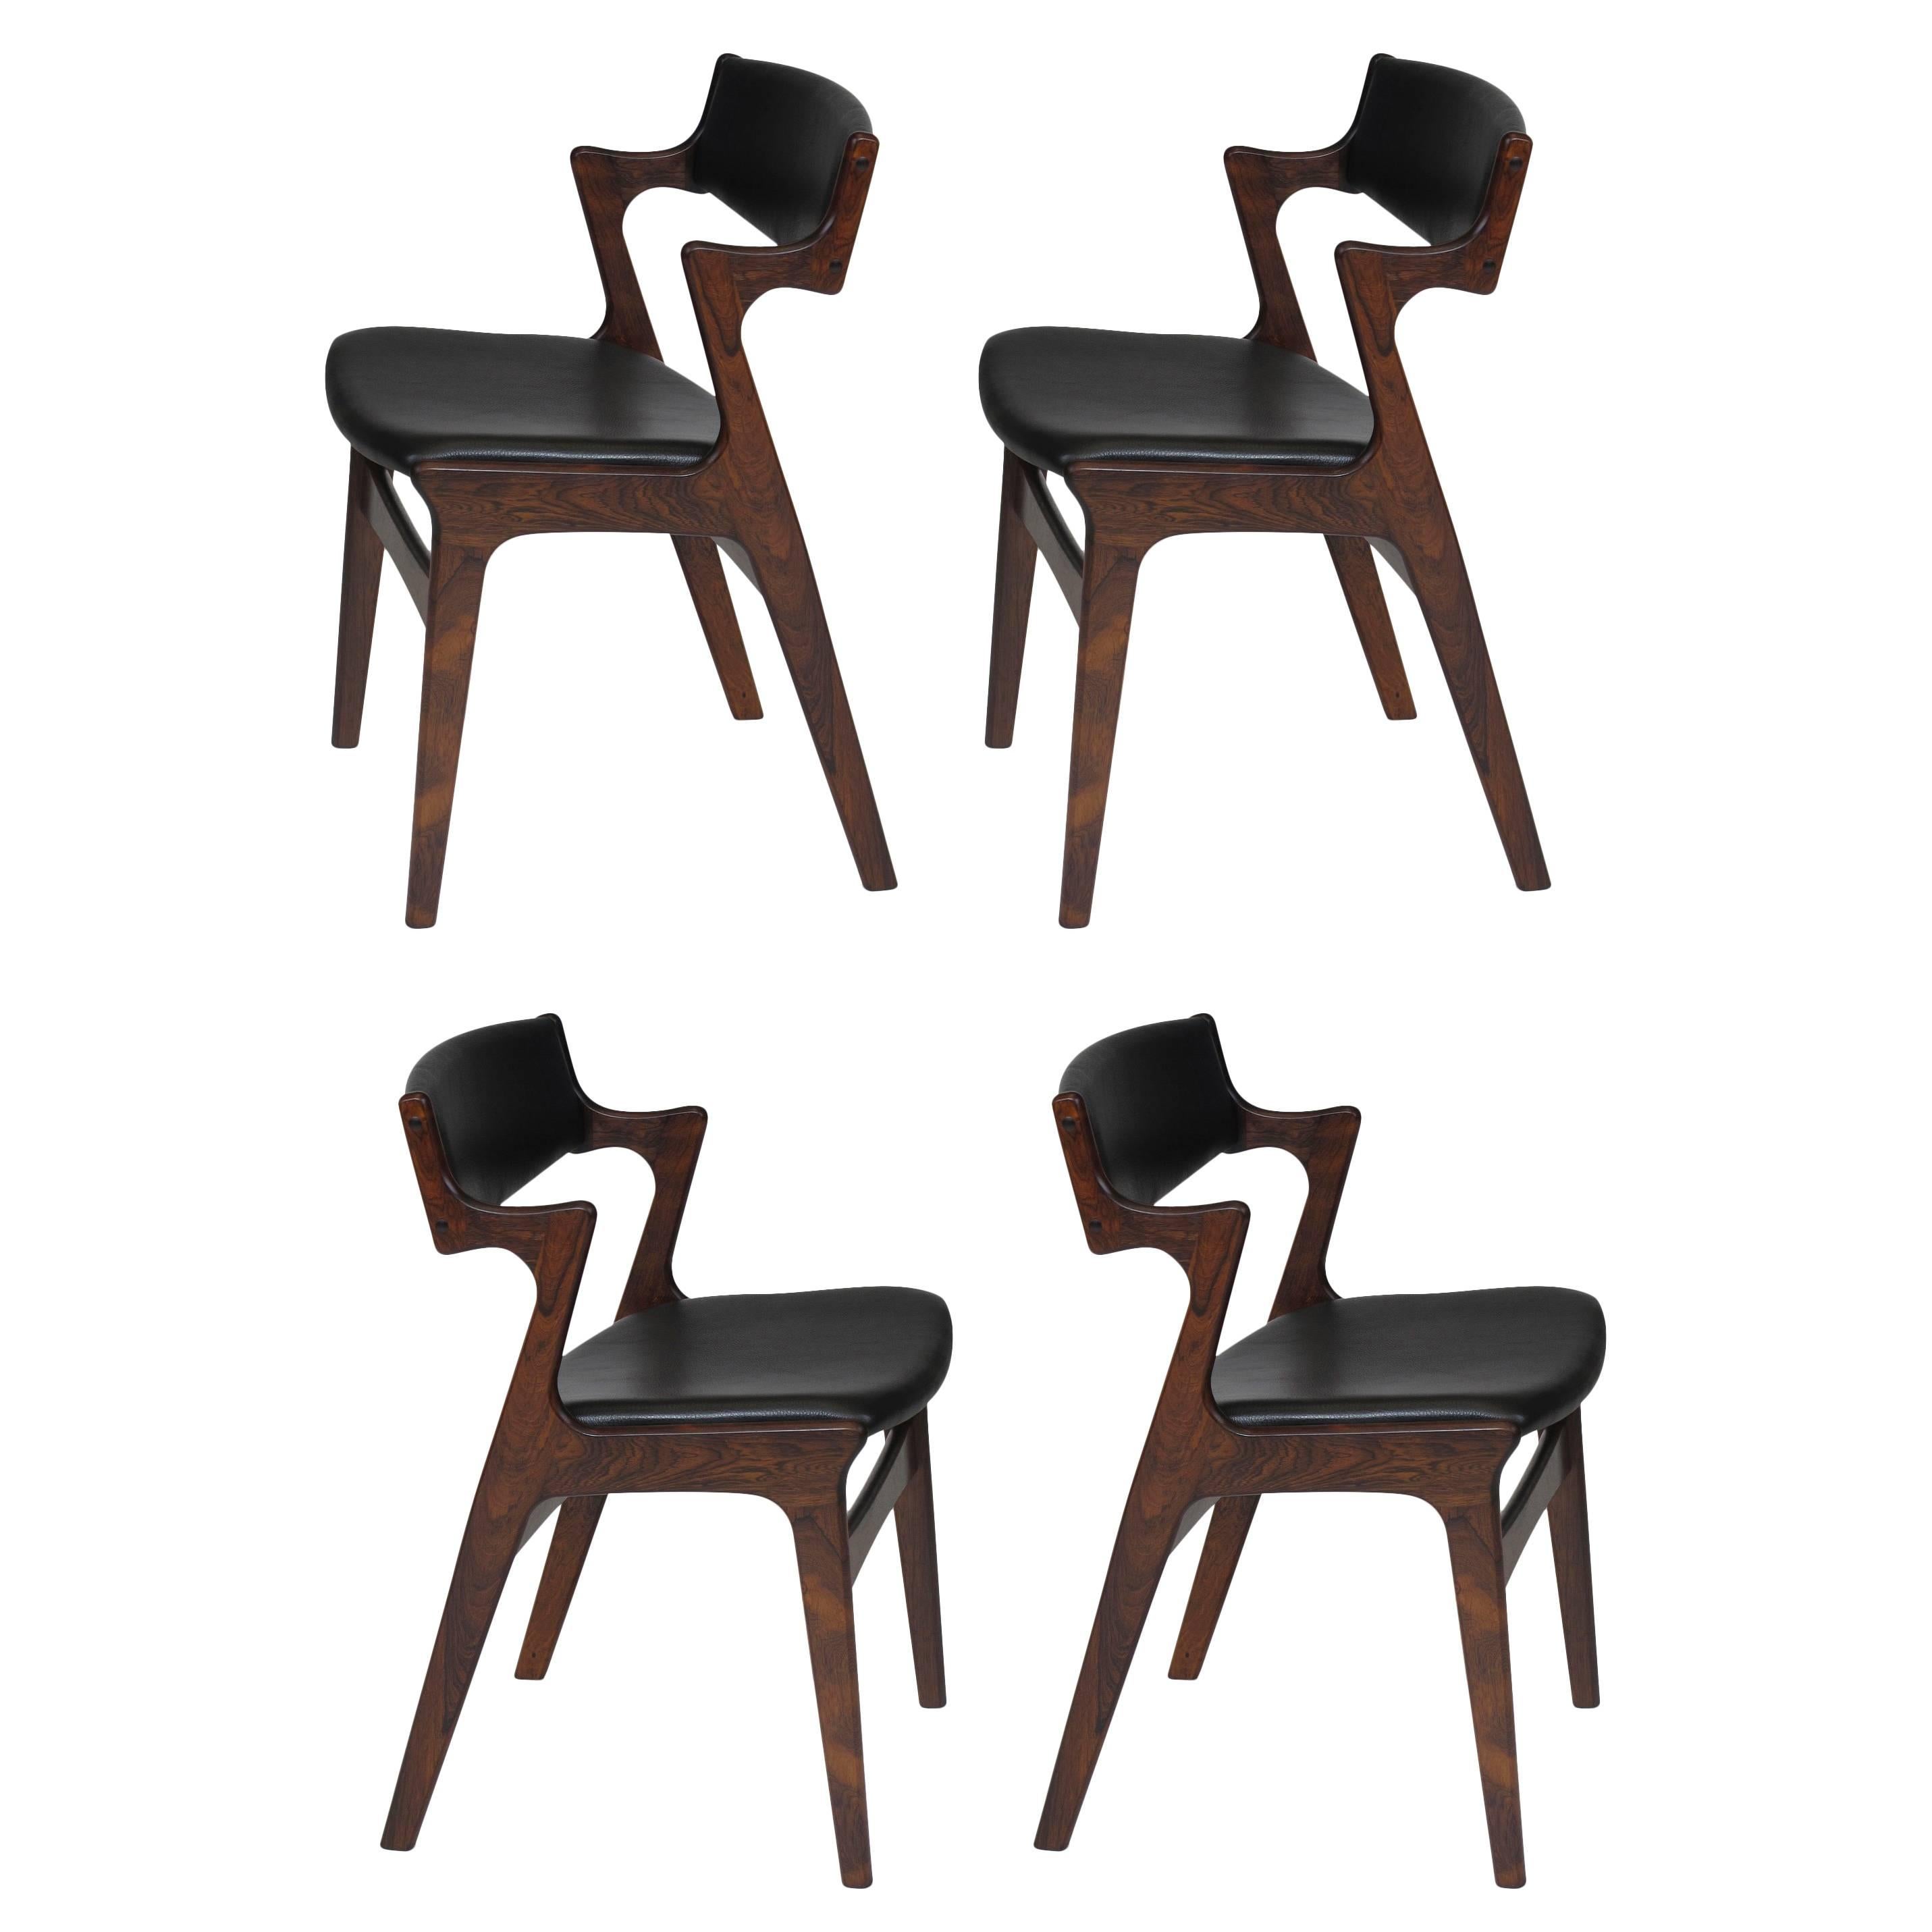 Four Danish Rosewood and Black Leather Dining Chairs